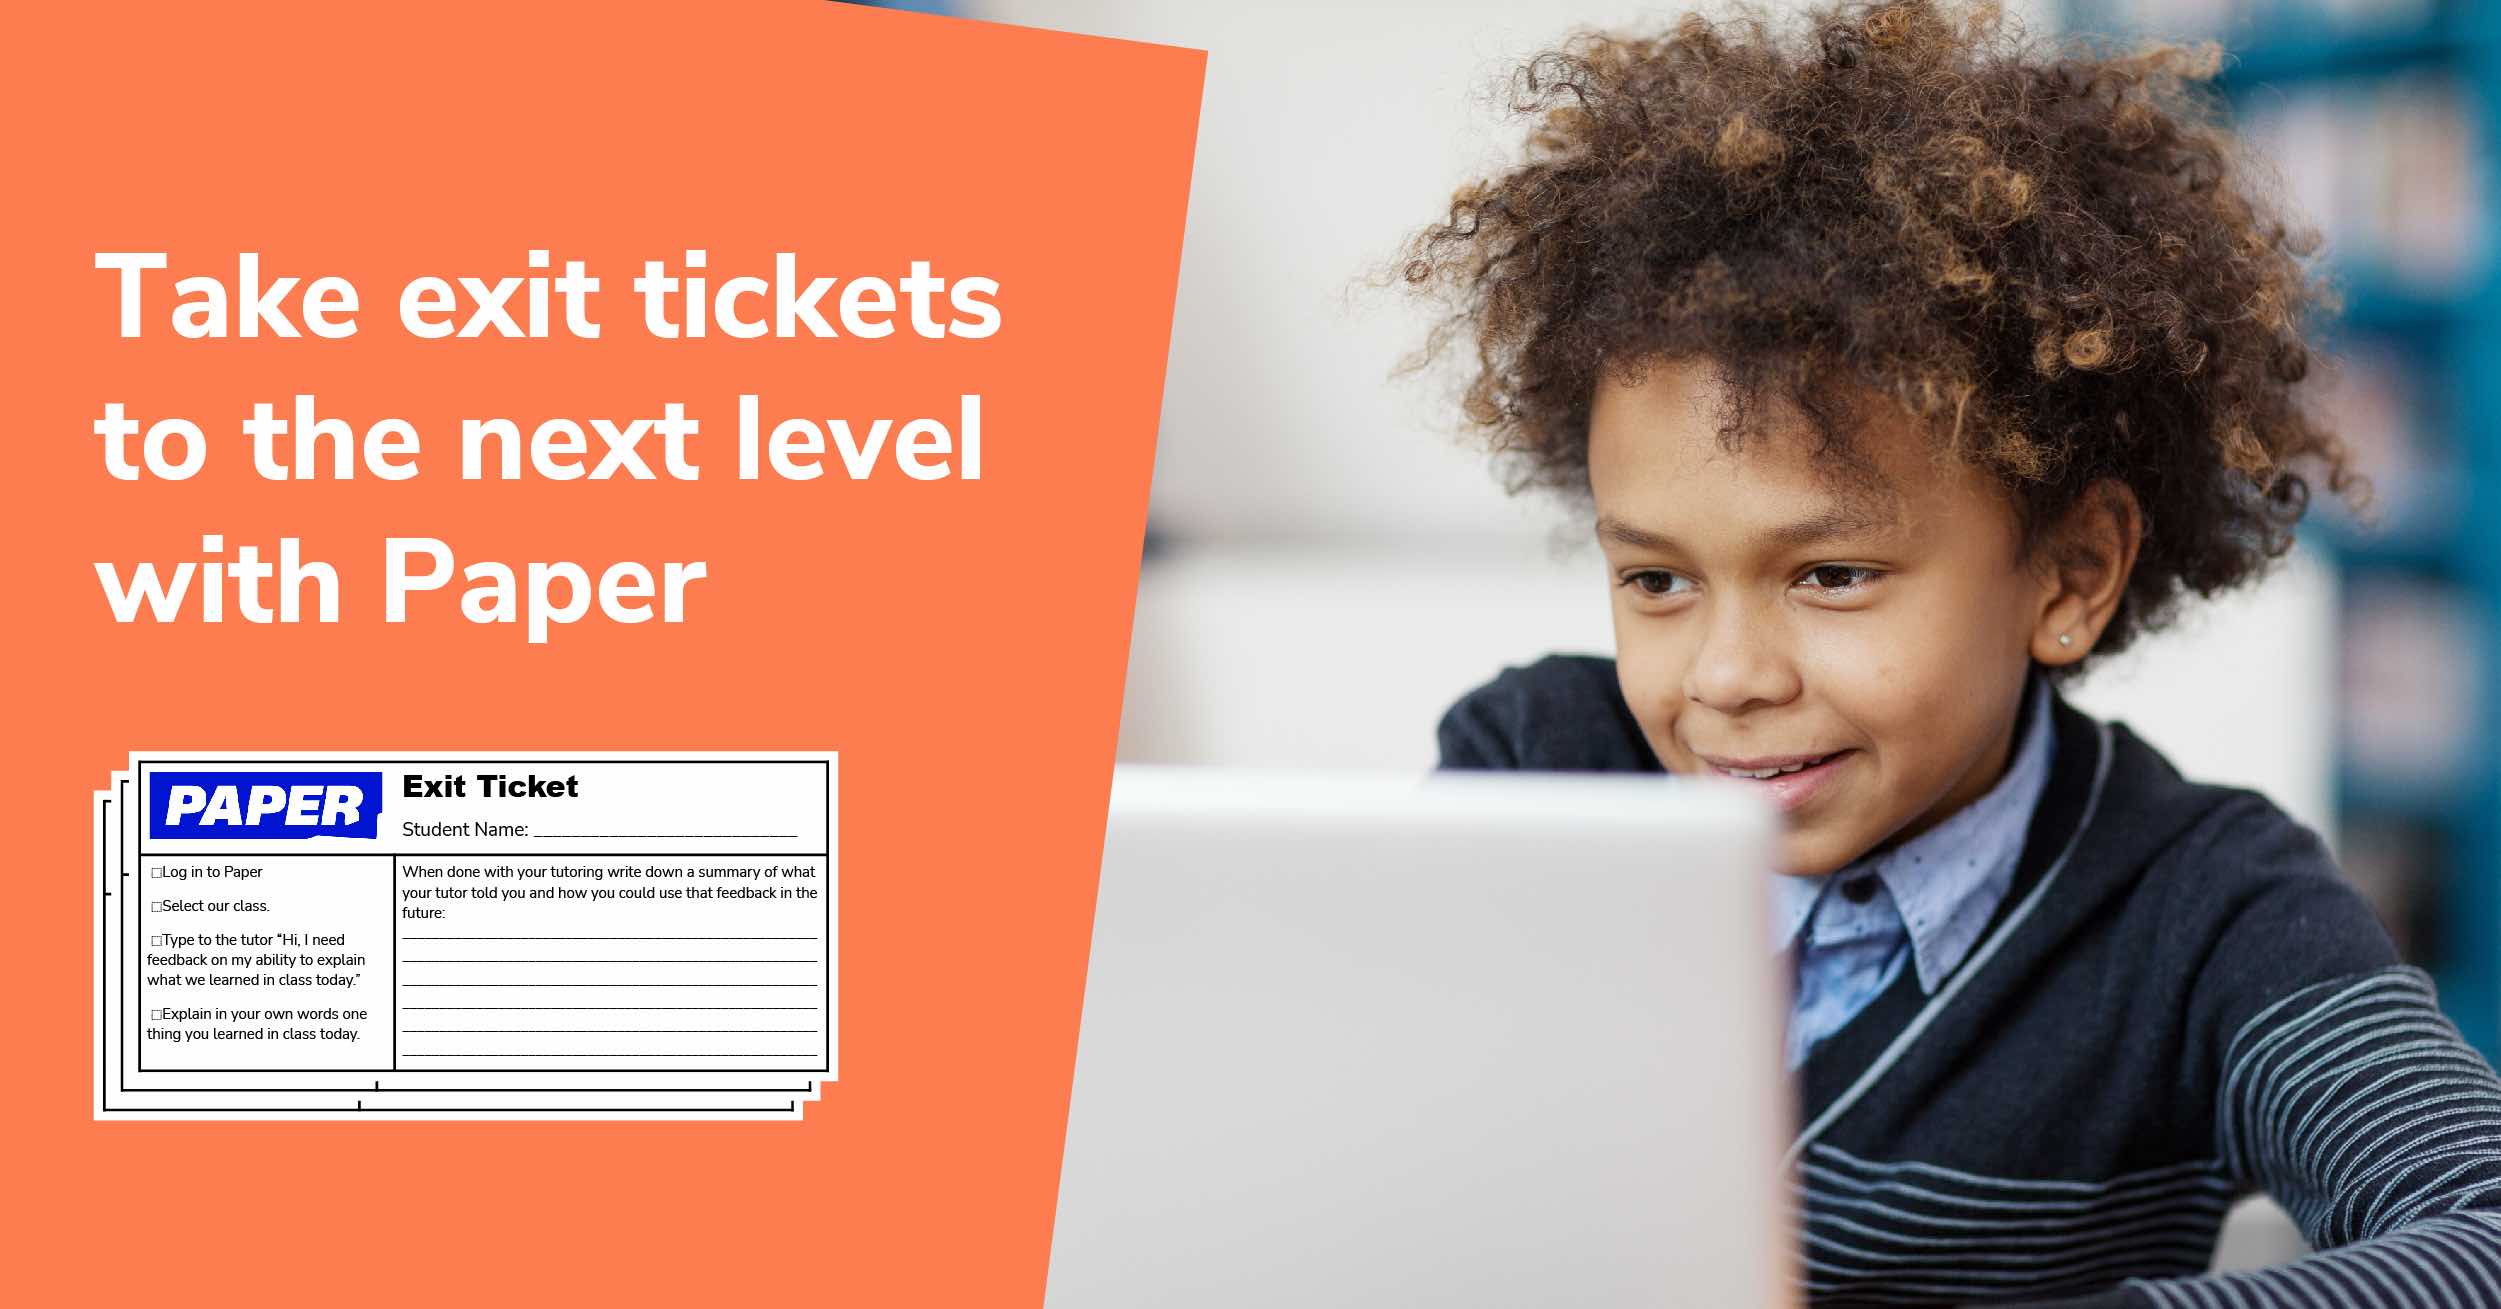 Take exit tickets to the next level with Paper